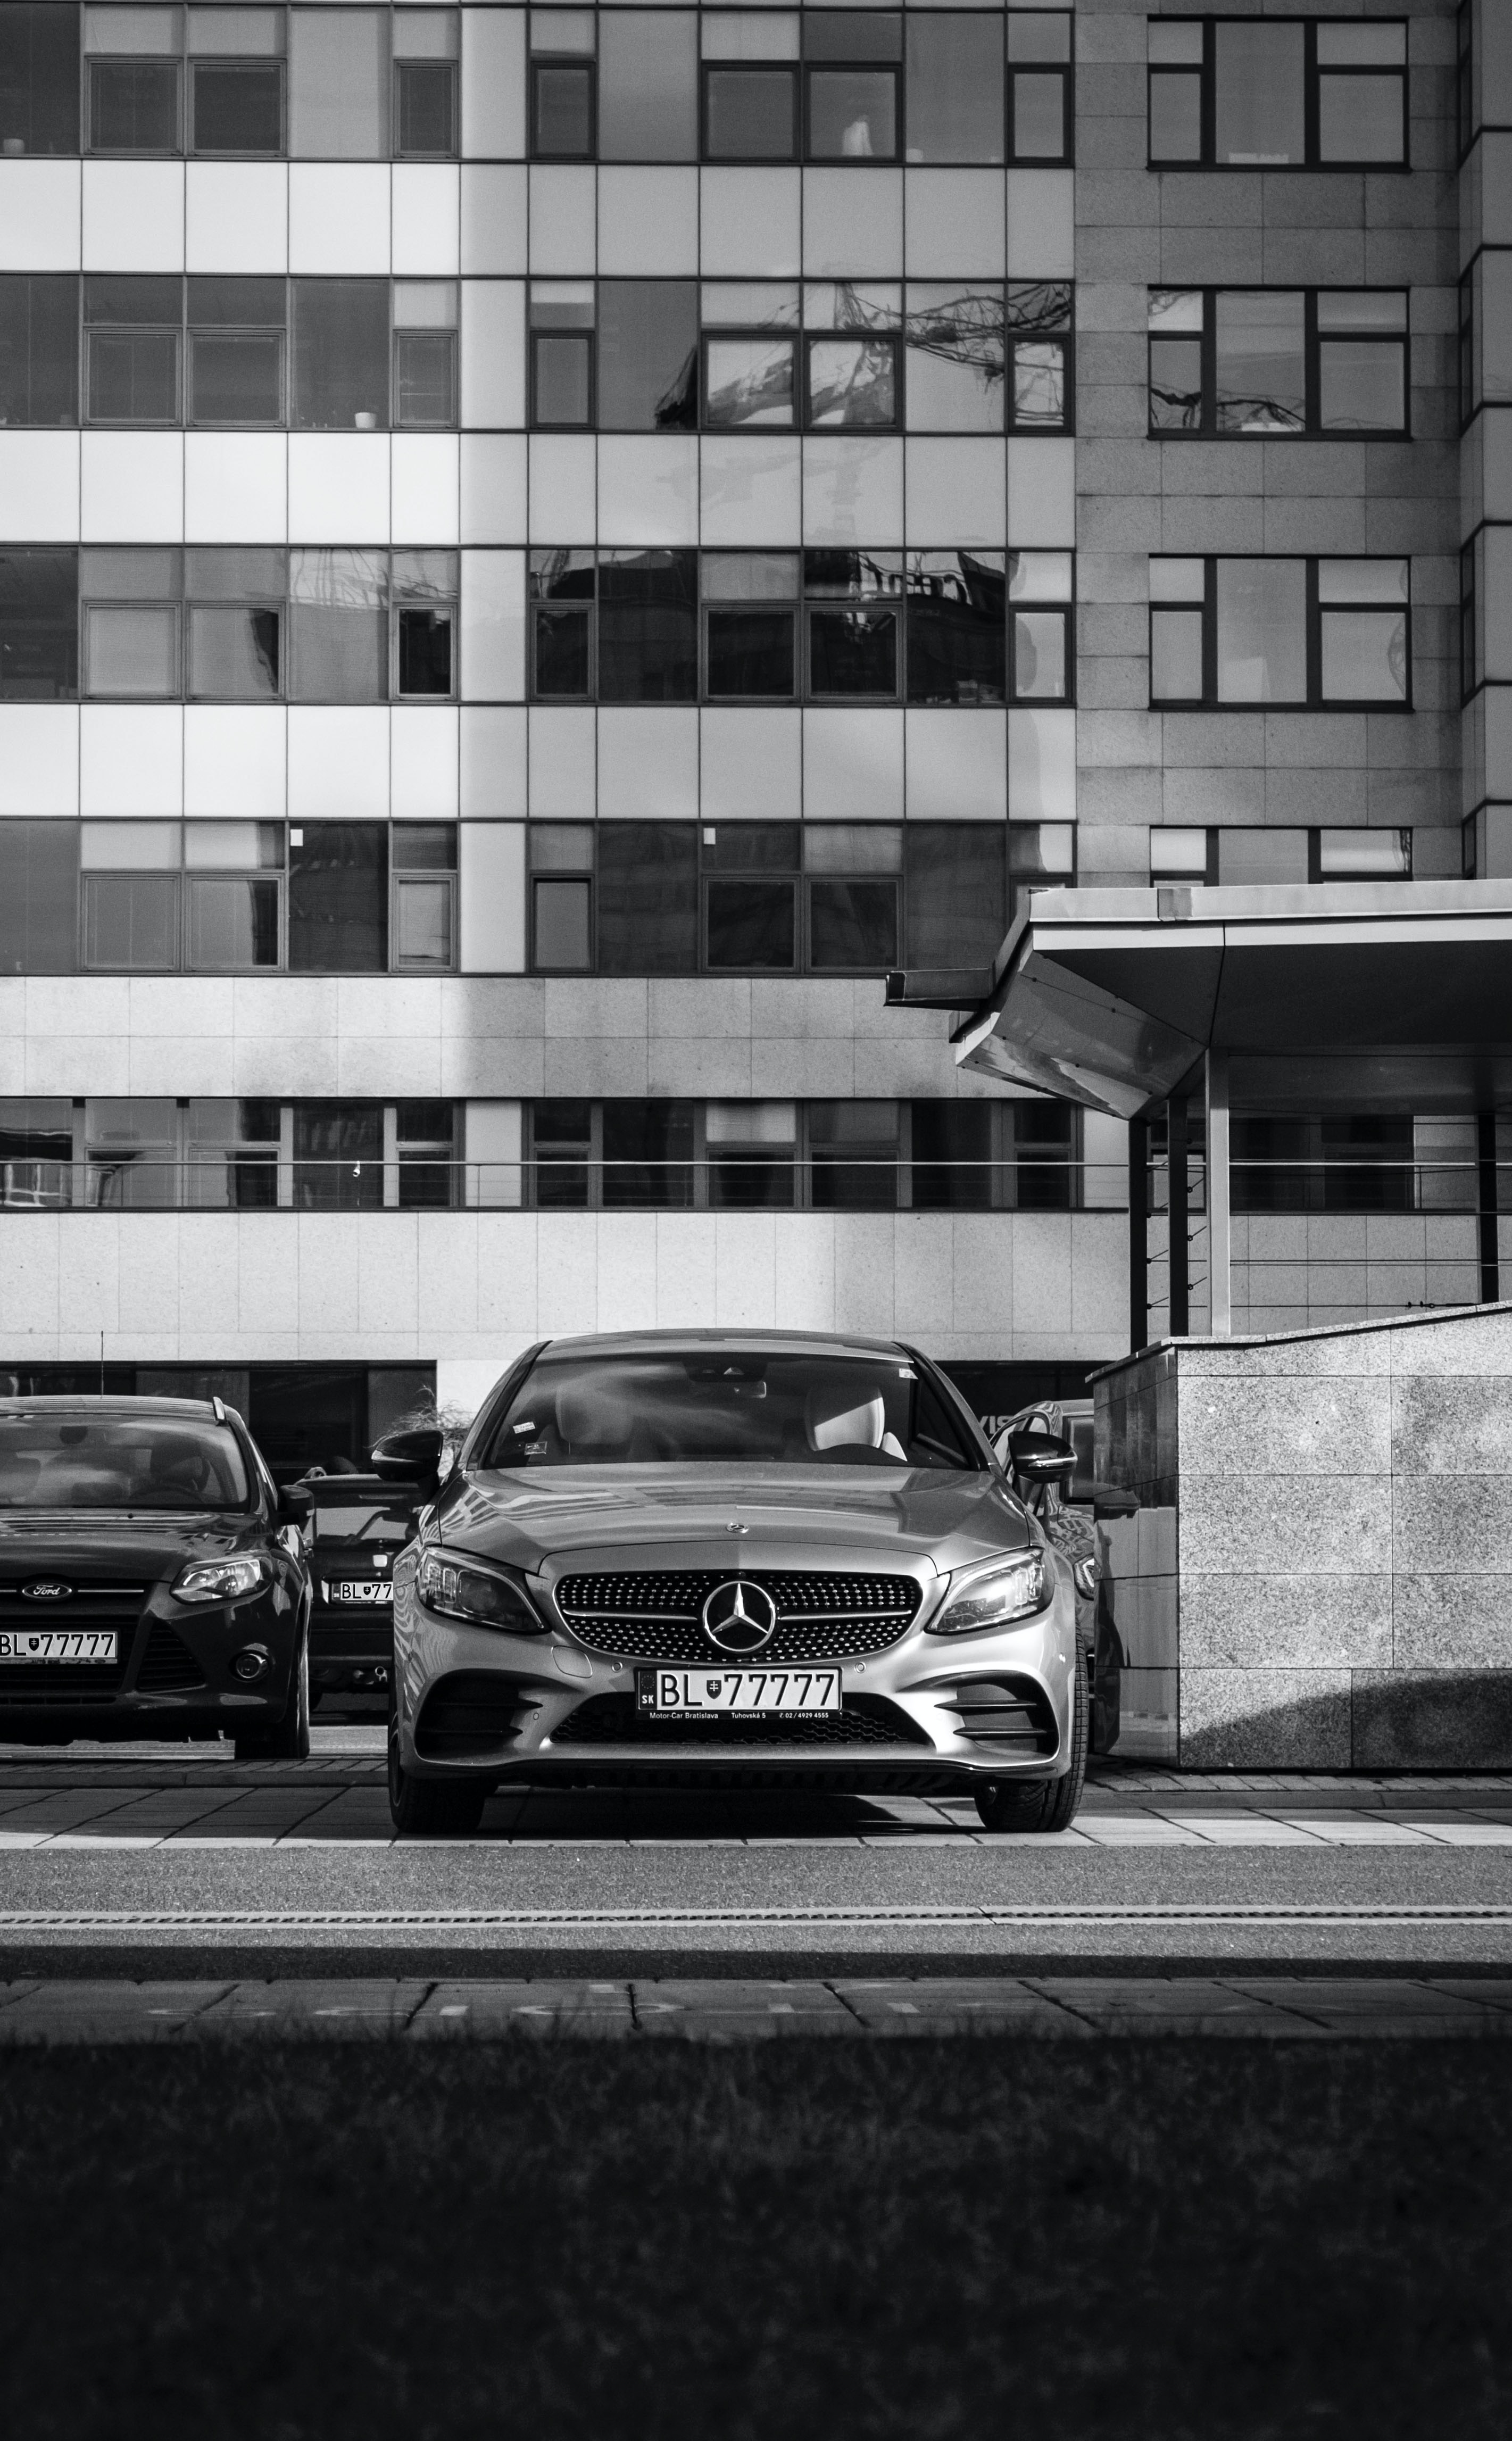 mercedes benz, cars, car, front view, bw, chb 2160p